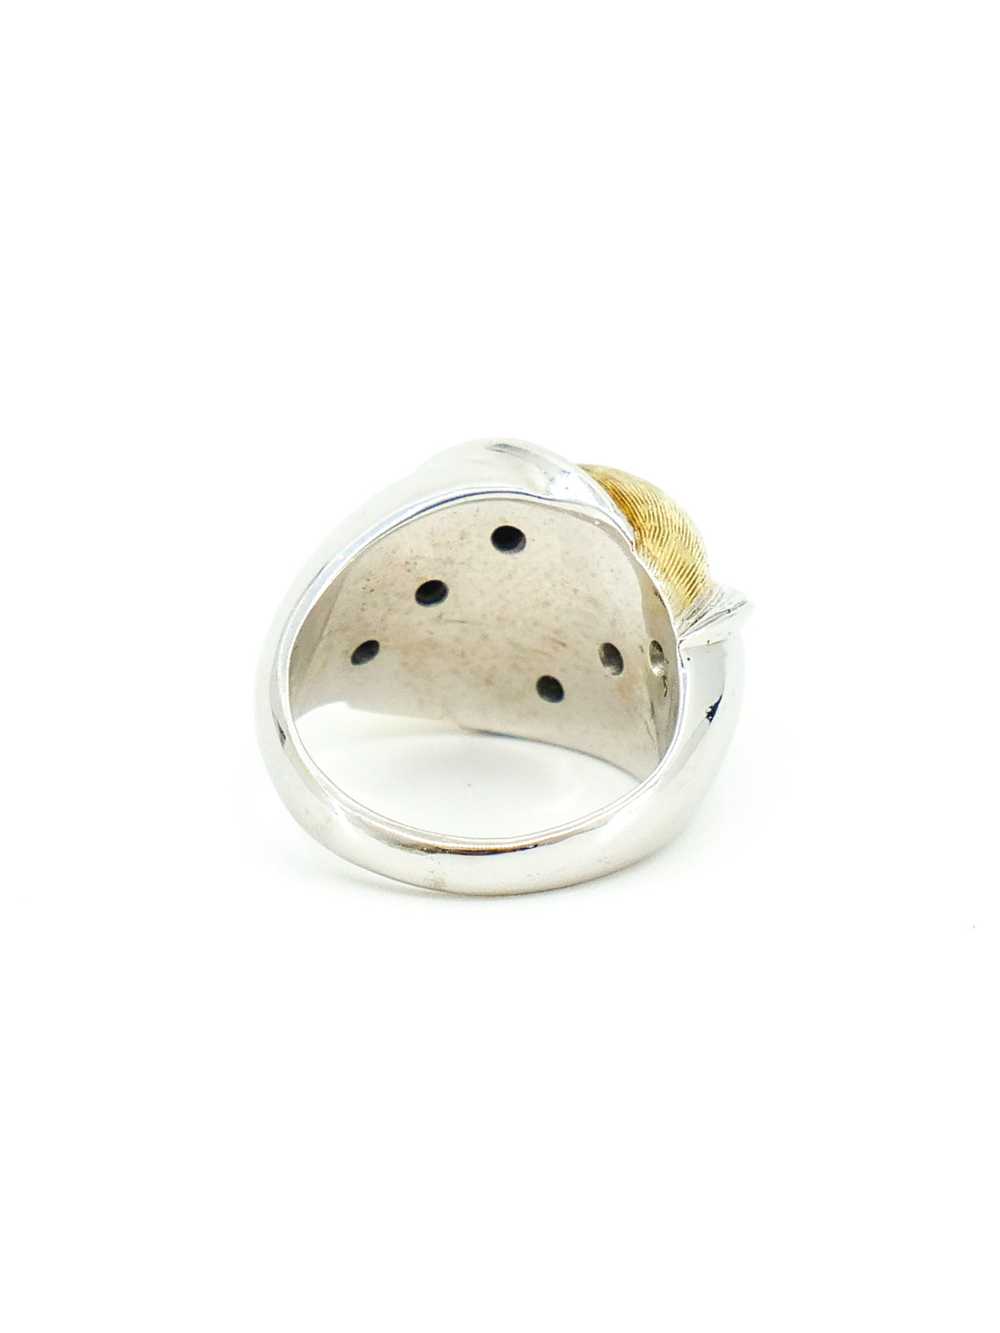 14K Yellow and White Gold Retro Style Dome Ring - image 4